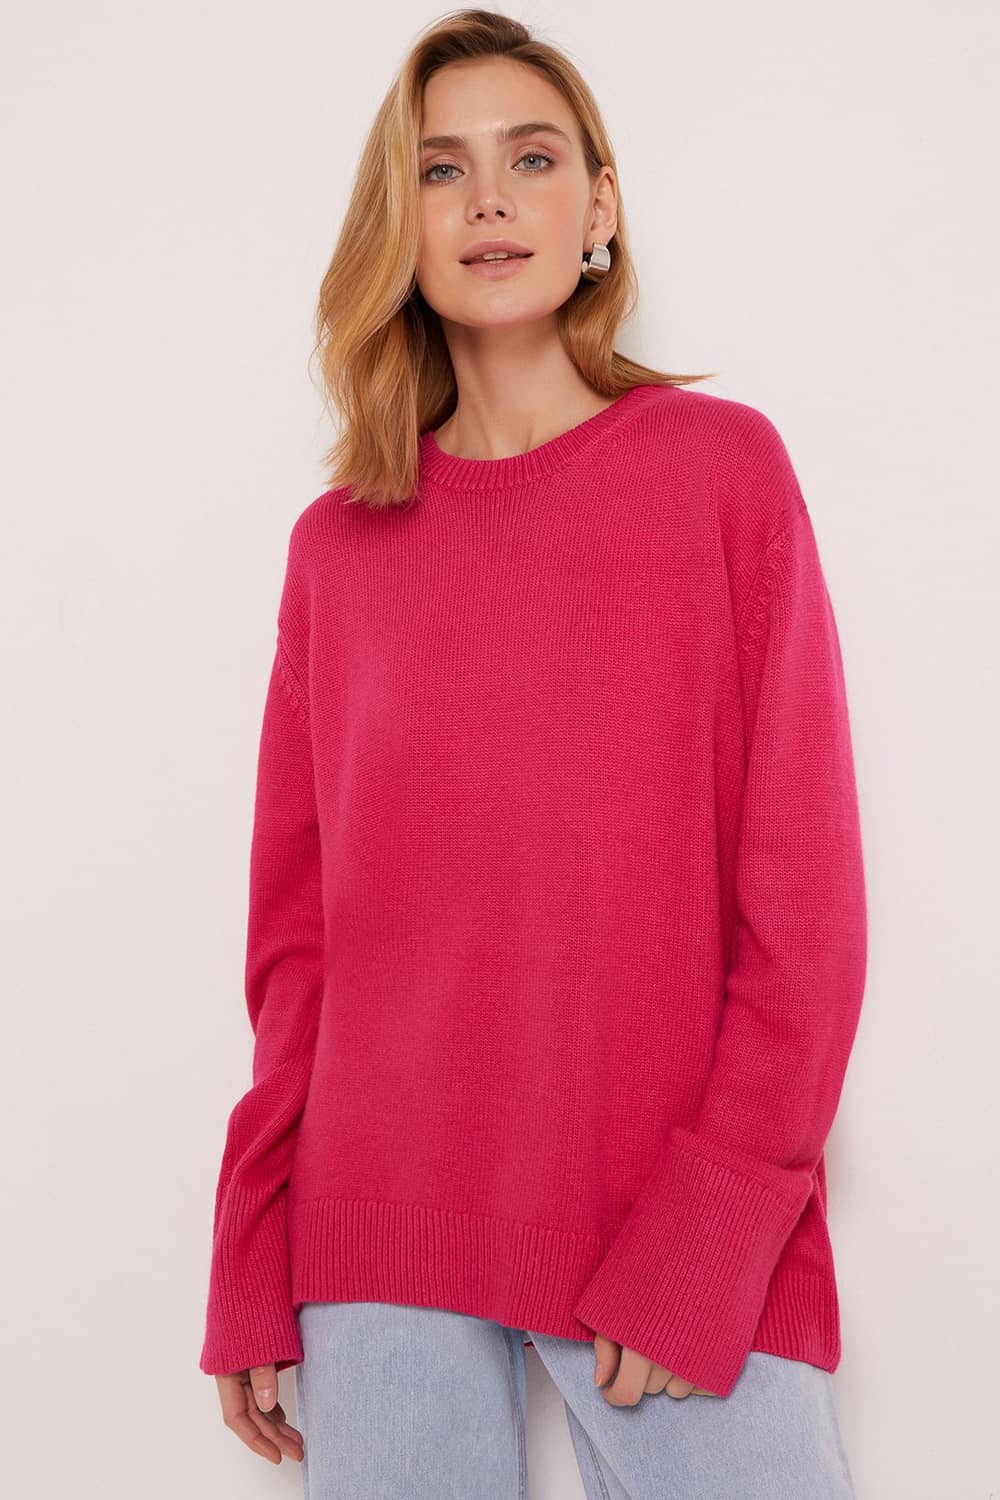 Women's solid color sweater